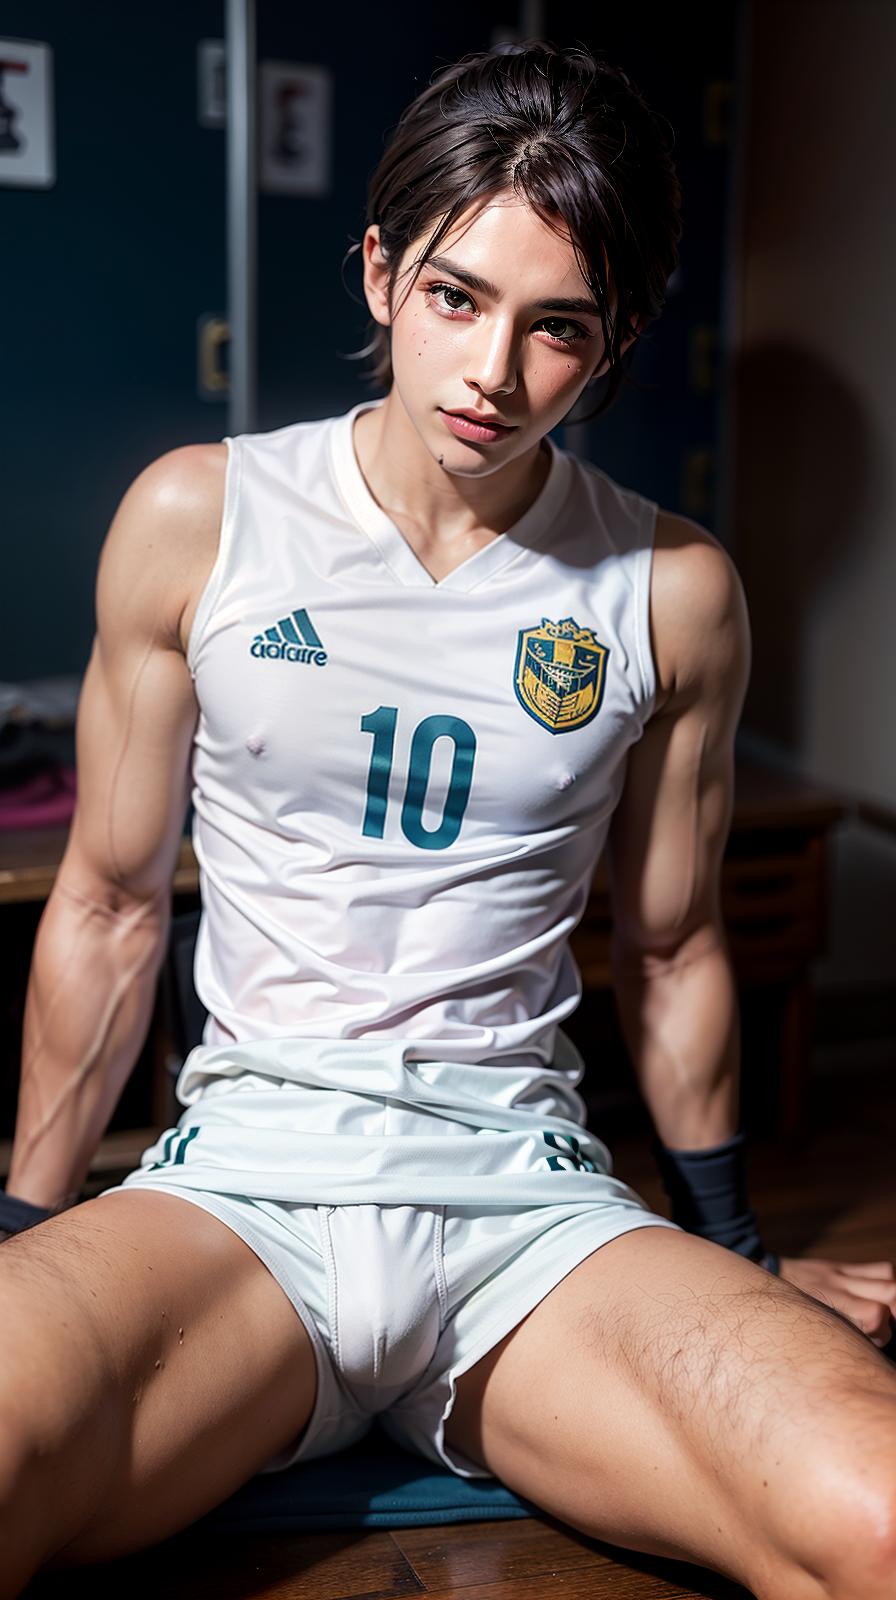  ultra high res, (photorealistic:1.4), raw photo, (realistic face), realistic eyes, (realistic skin), <lora:XXMix9_v20LoRa:0.8>, handsome, (male:2), (young soccer players:1.3), (pompadour:1.1), (white briefs:1.3), (sleeveless:1.2), spike shoes, (soccer shin guards:1.3), young, sitting posture, (spread legs:1.1), real skin, (sexy posing:1.3), hot guy, (muscular:1.3), (naked:1.1), (bulge:1.1), trained calves, thigh, realistic, lifelike, high quality, photos taken with a single-lens reflex camera, (looking at the camera:1.2), (locker room:1.1)